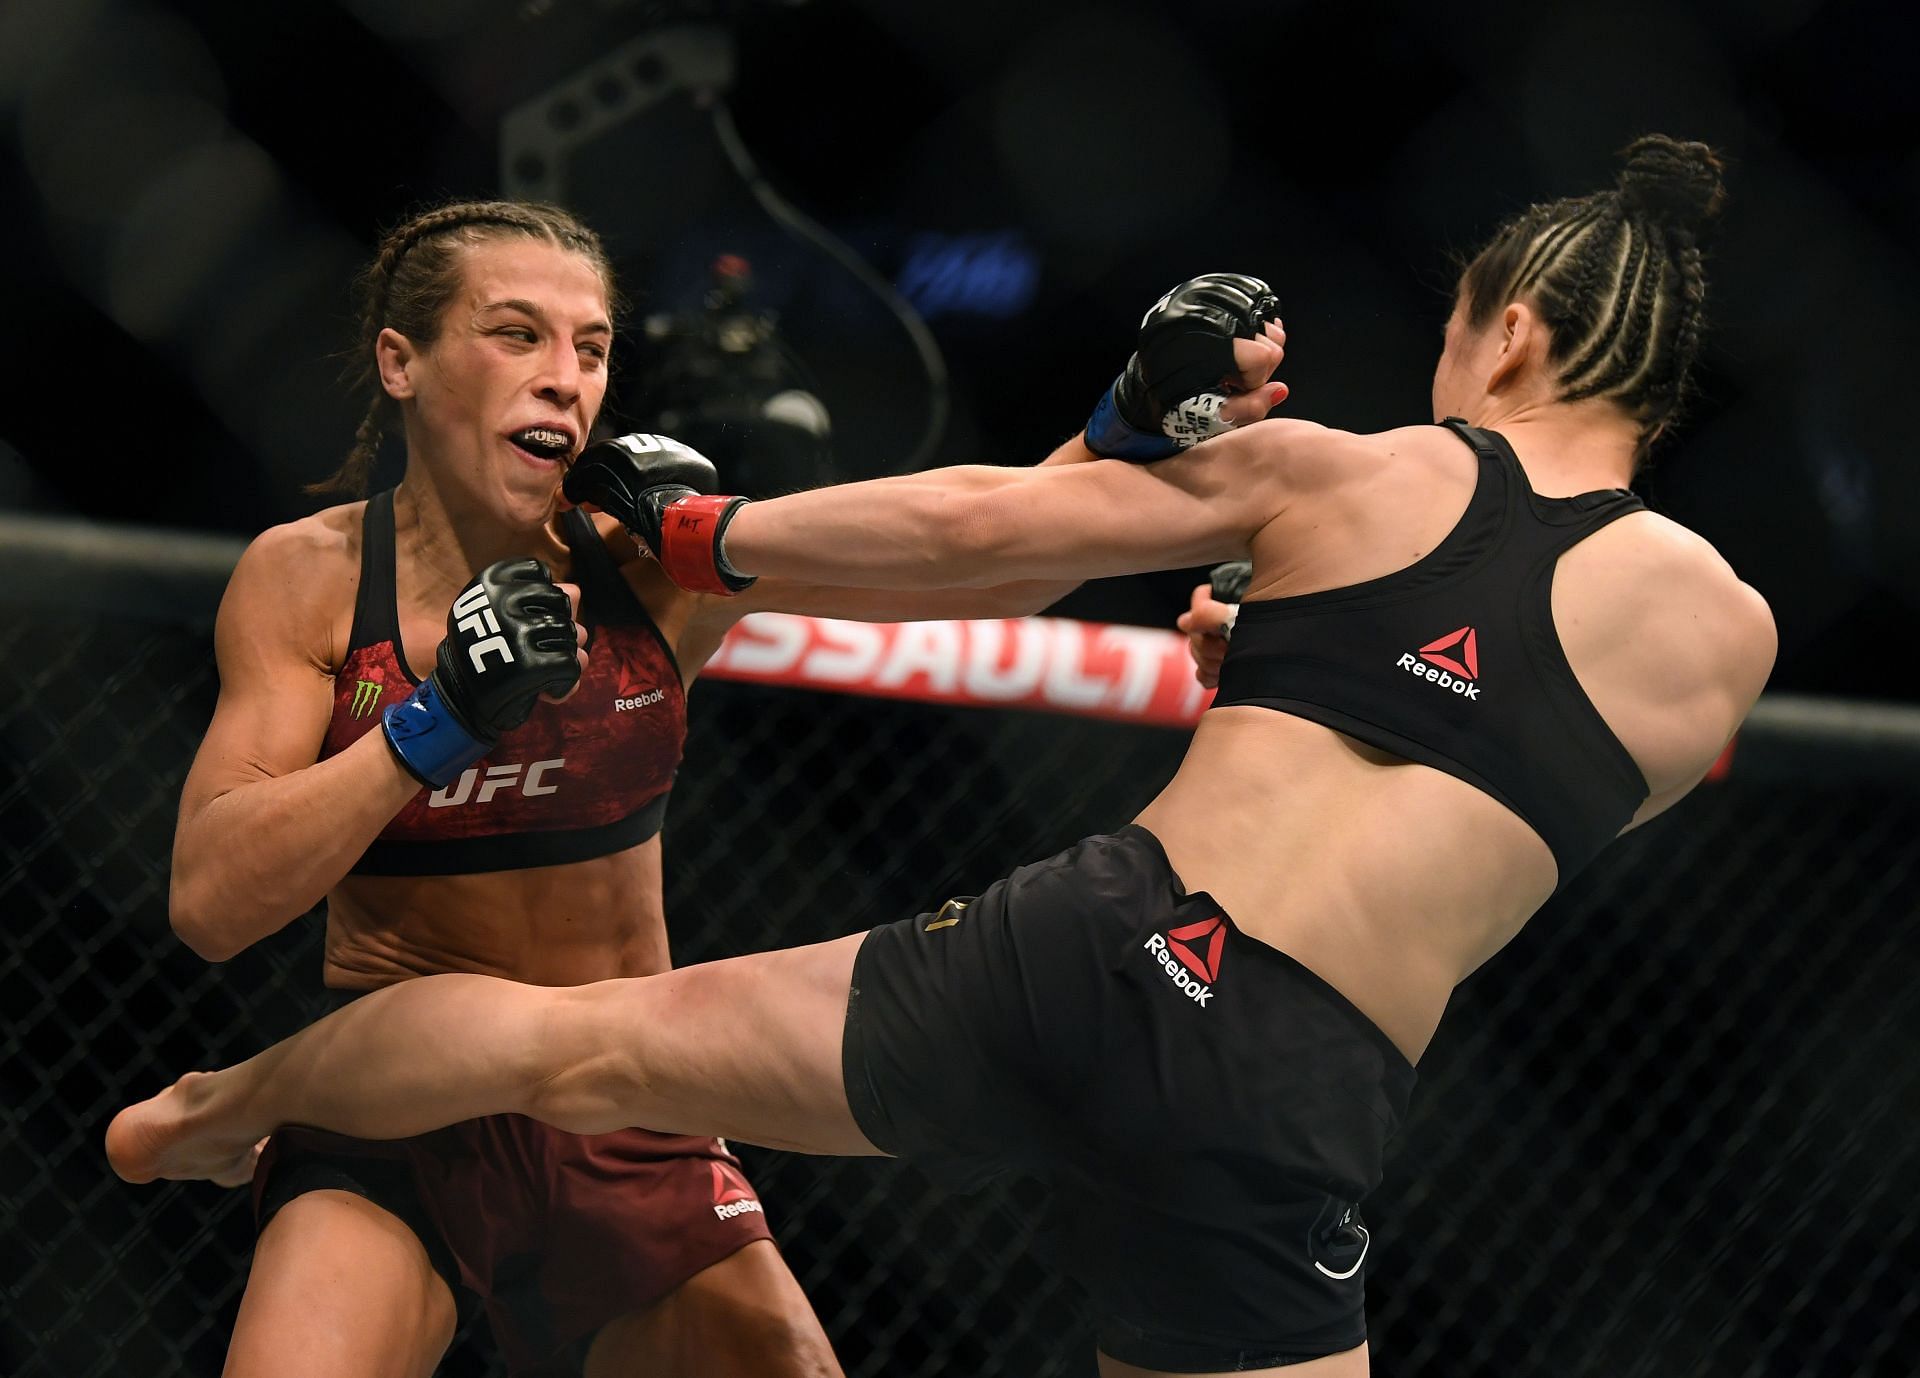 Jedrzejczyk and Weili fought previously in March 2020